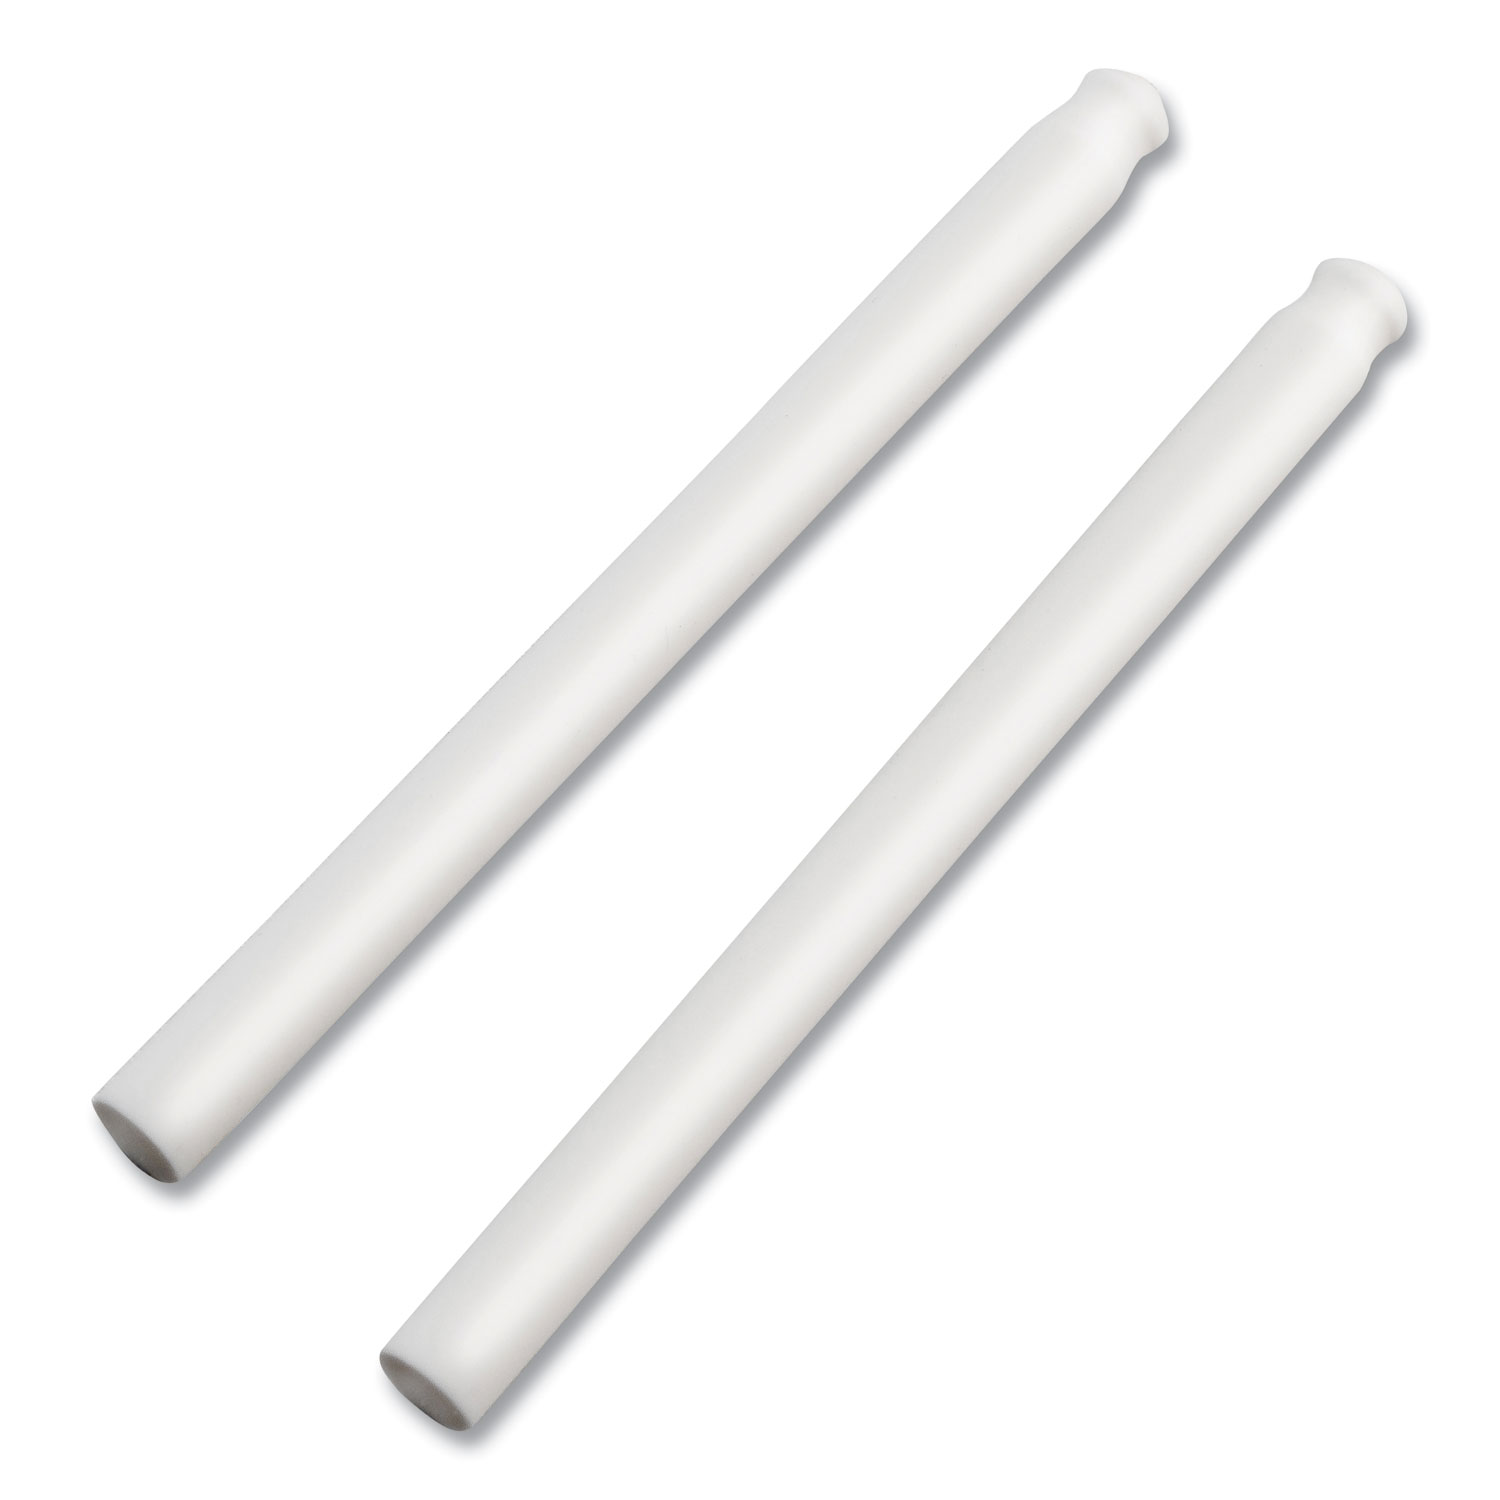 Clic Eraser Refills for Pentel Clic Erasers, Cylindrical Rod, White, 2/Pack  - ASE Direct